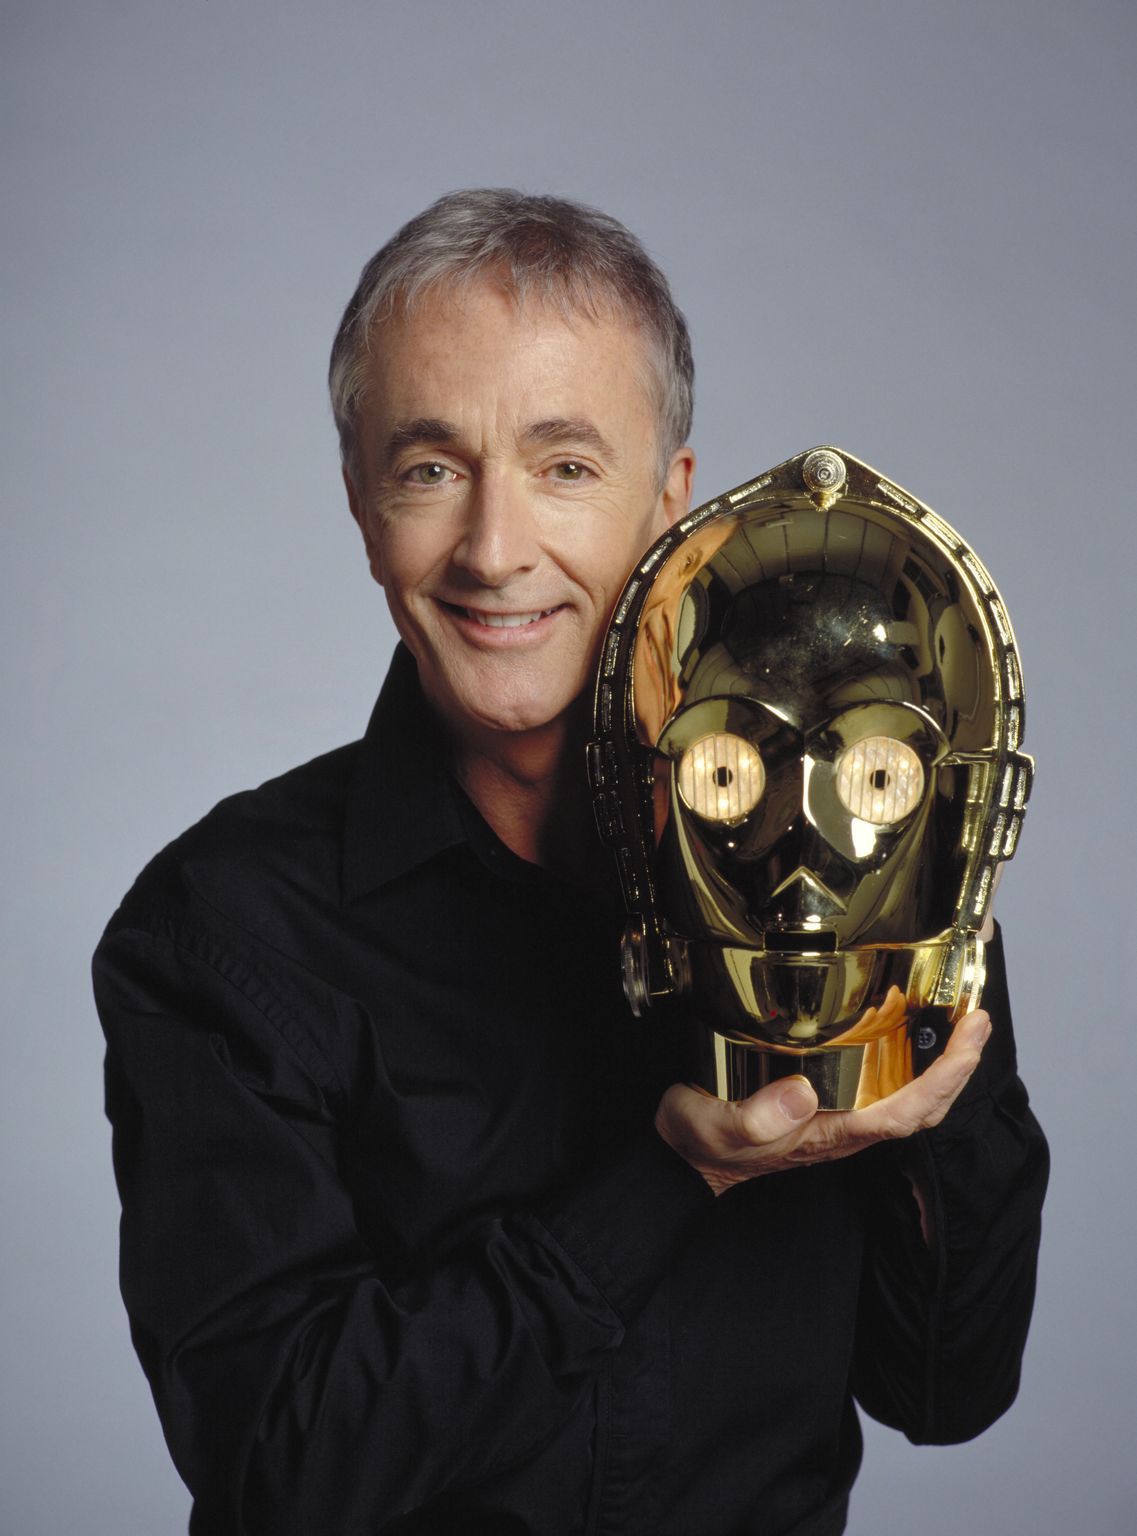 Who played C-3PO in Star Wars?